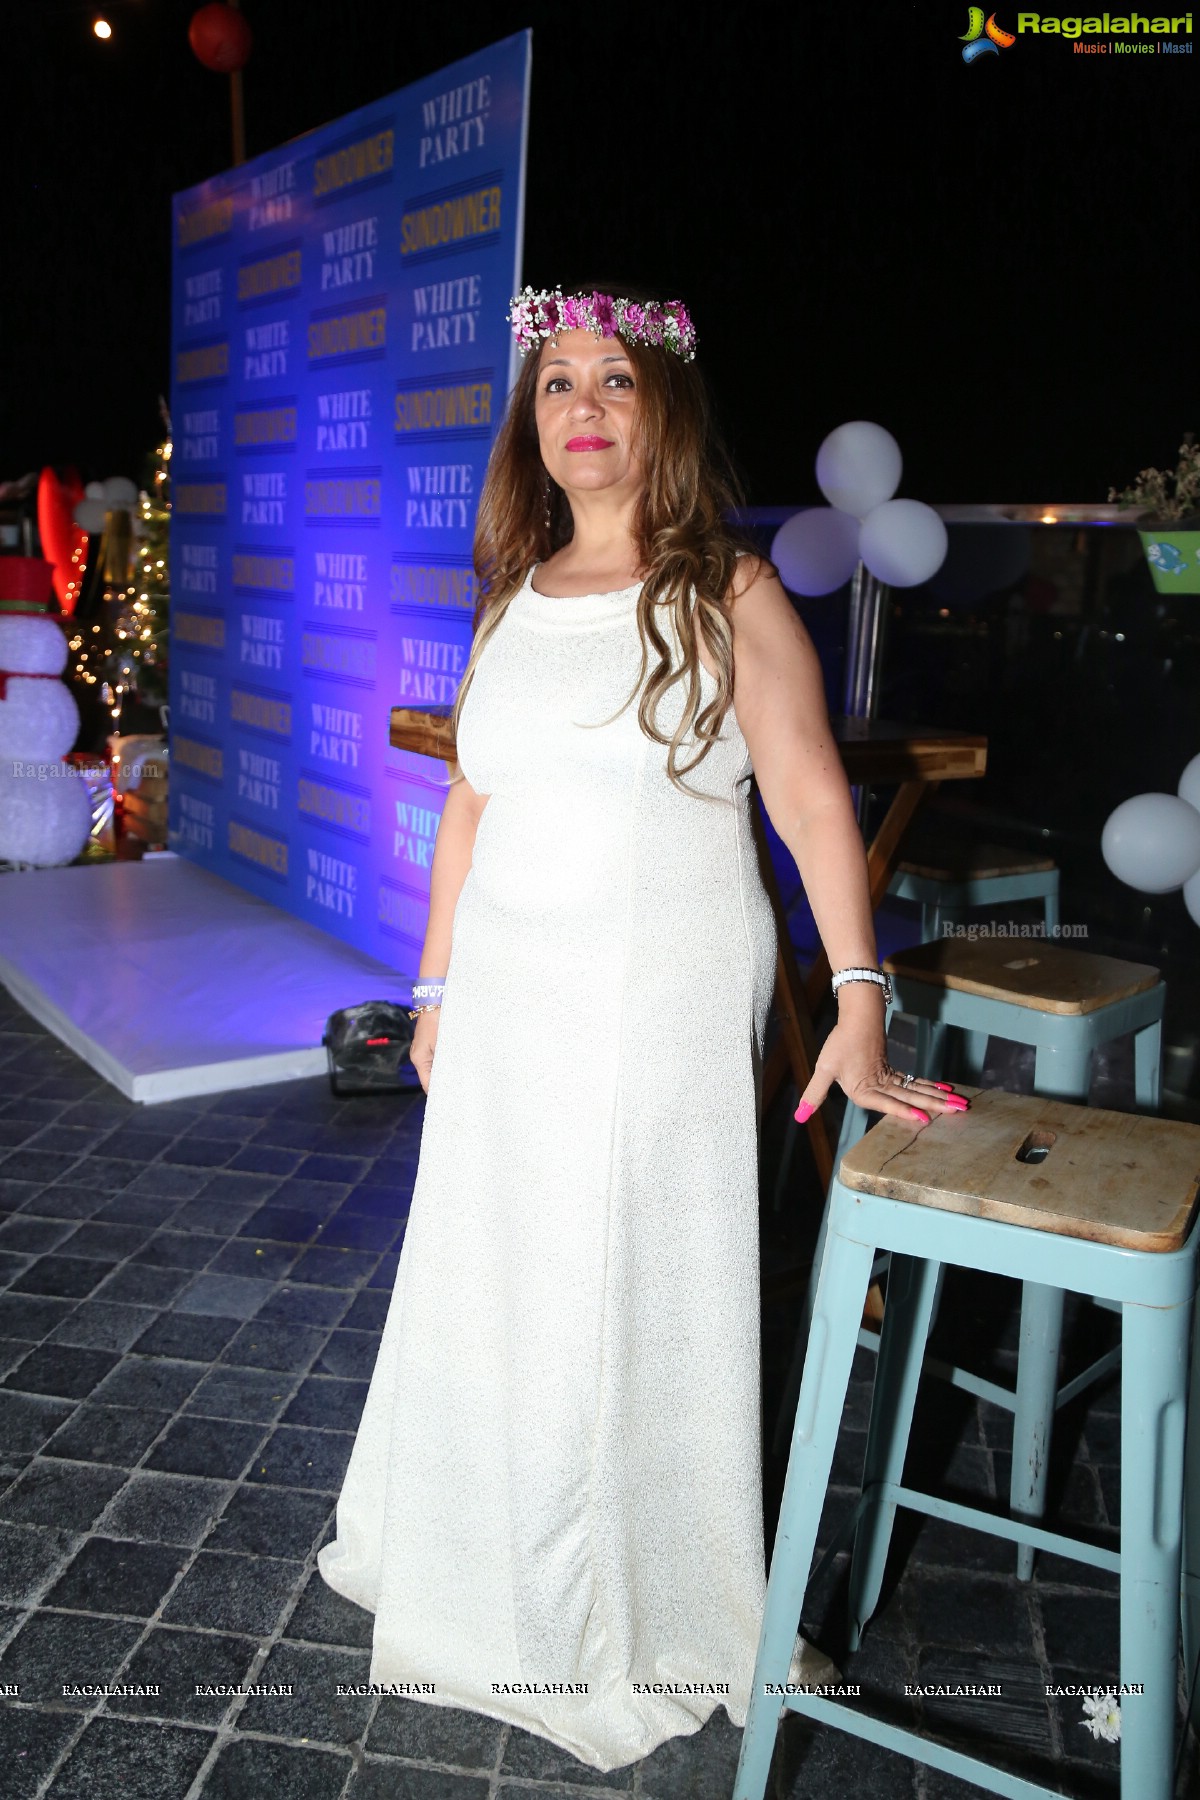 Sun Downer White Party by Laila and Feroz Khan at Karma